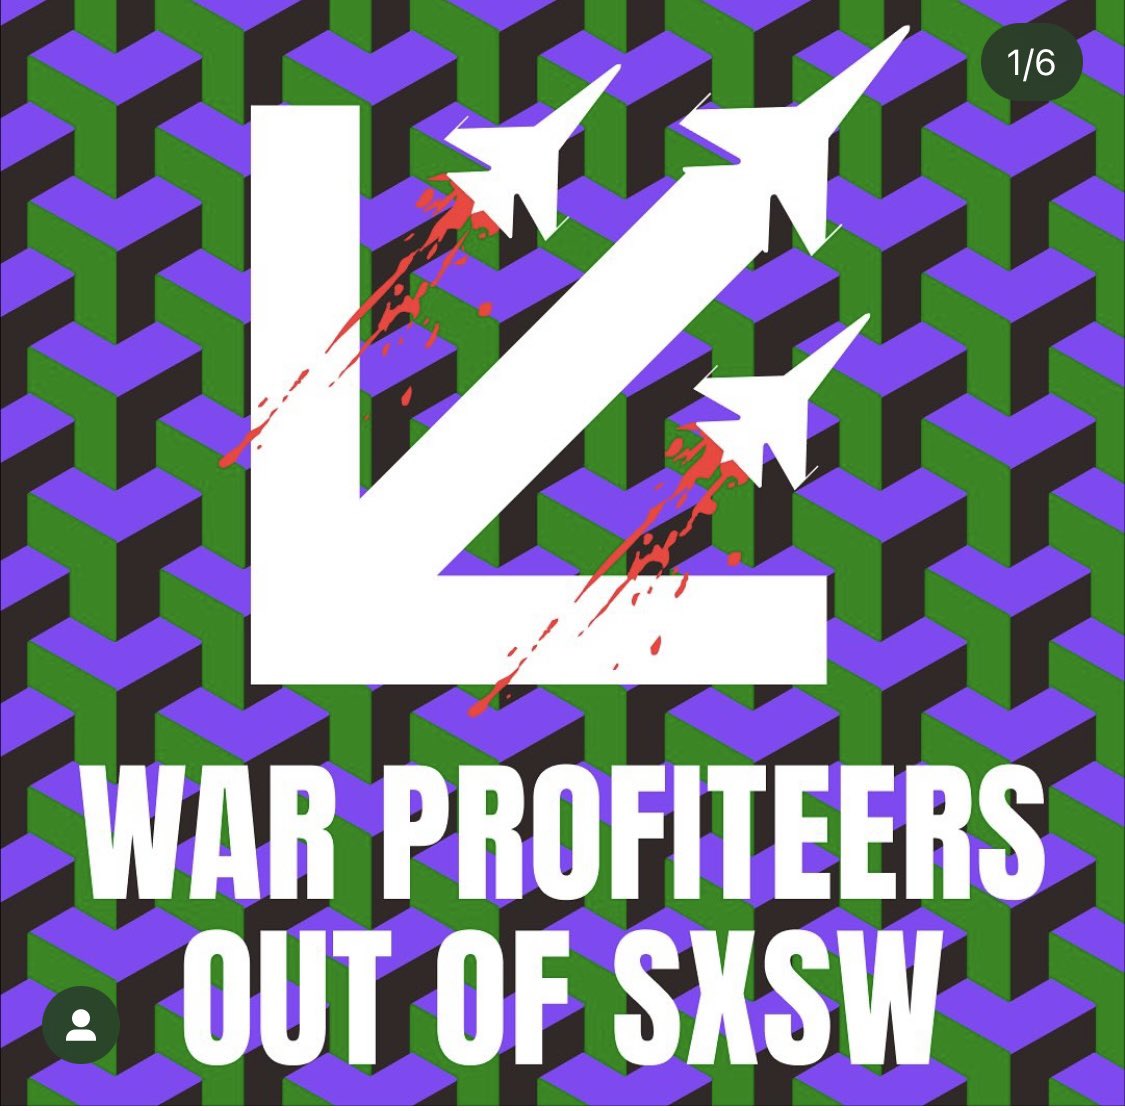 Hi friends, I was looking forward to connecting at @SXSW tmrw, but I’m pulling out after learning about the unacceptable deep links the festival has to weapons manufacturers and the US military who at this very moment are enabling the genocide of Palestinians.